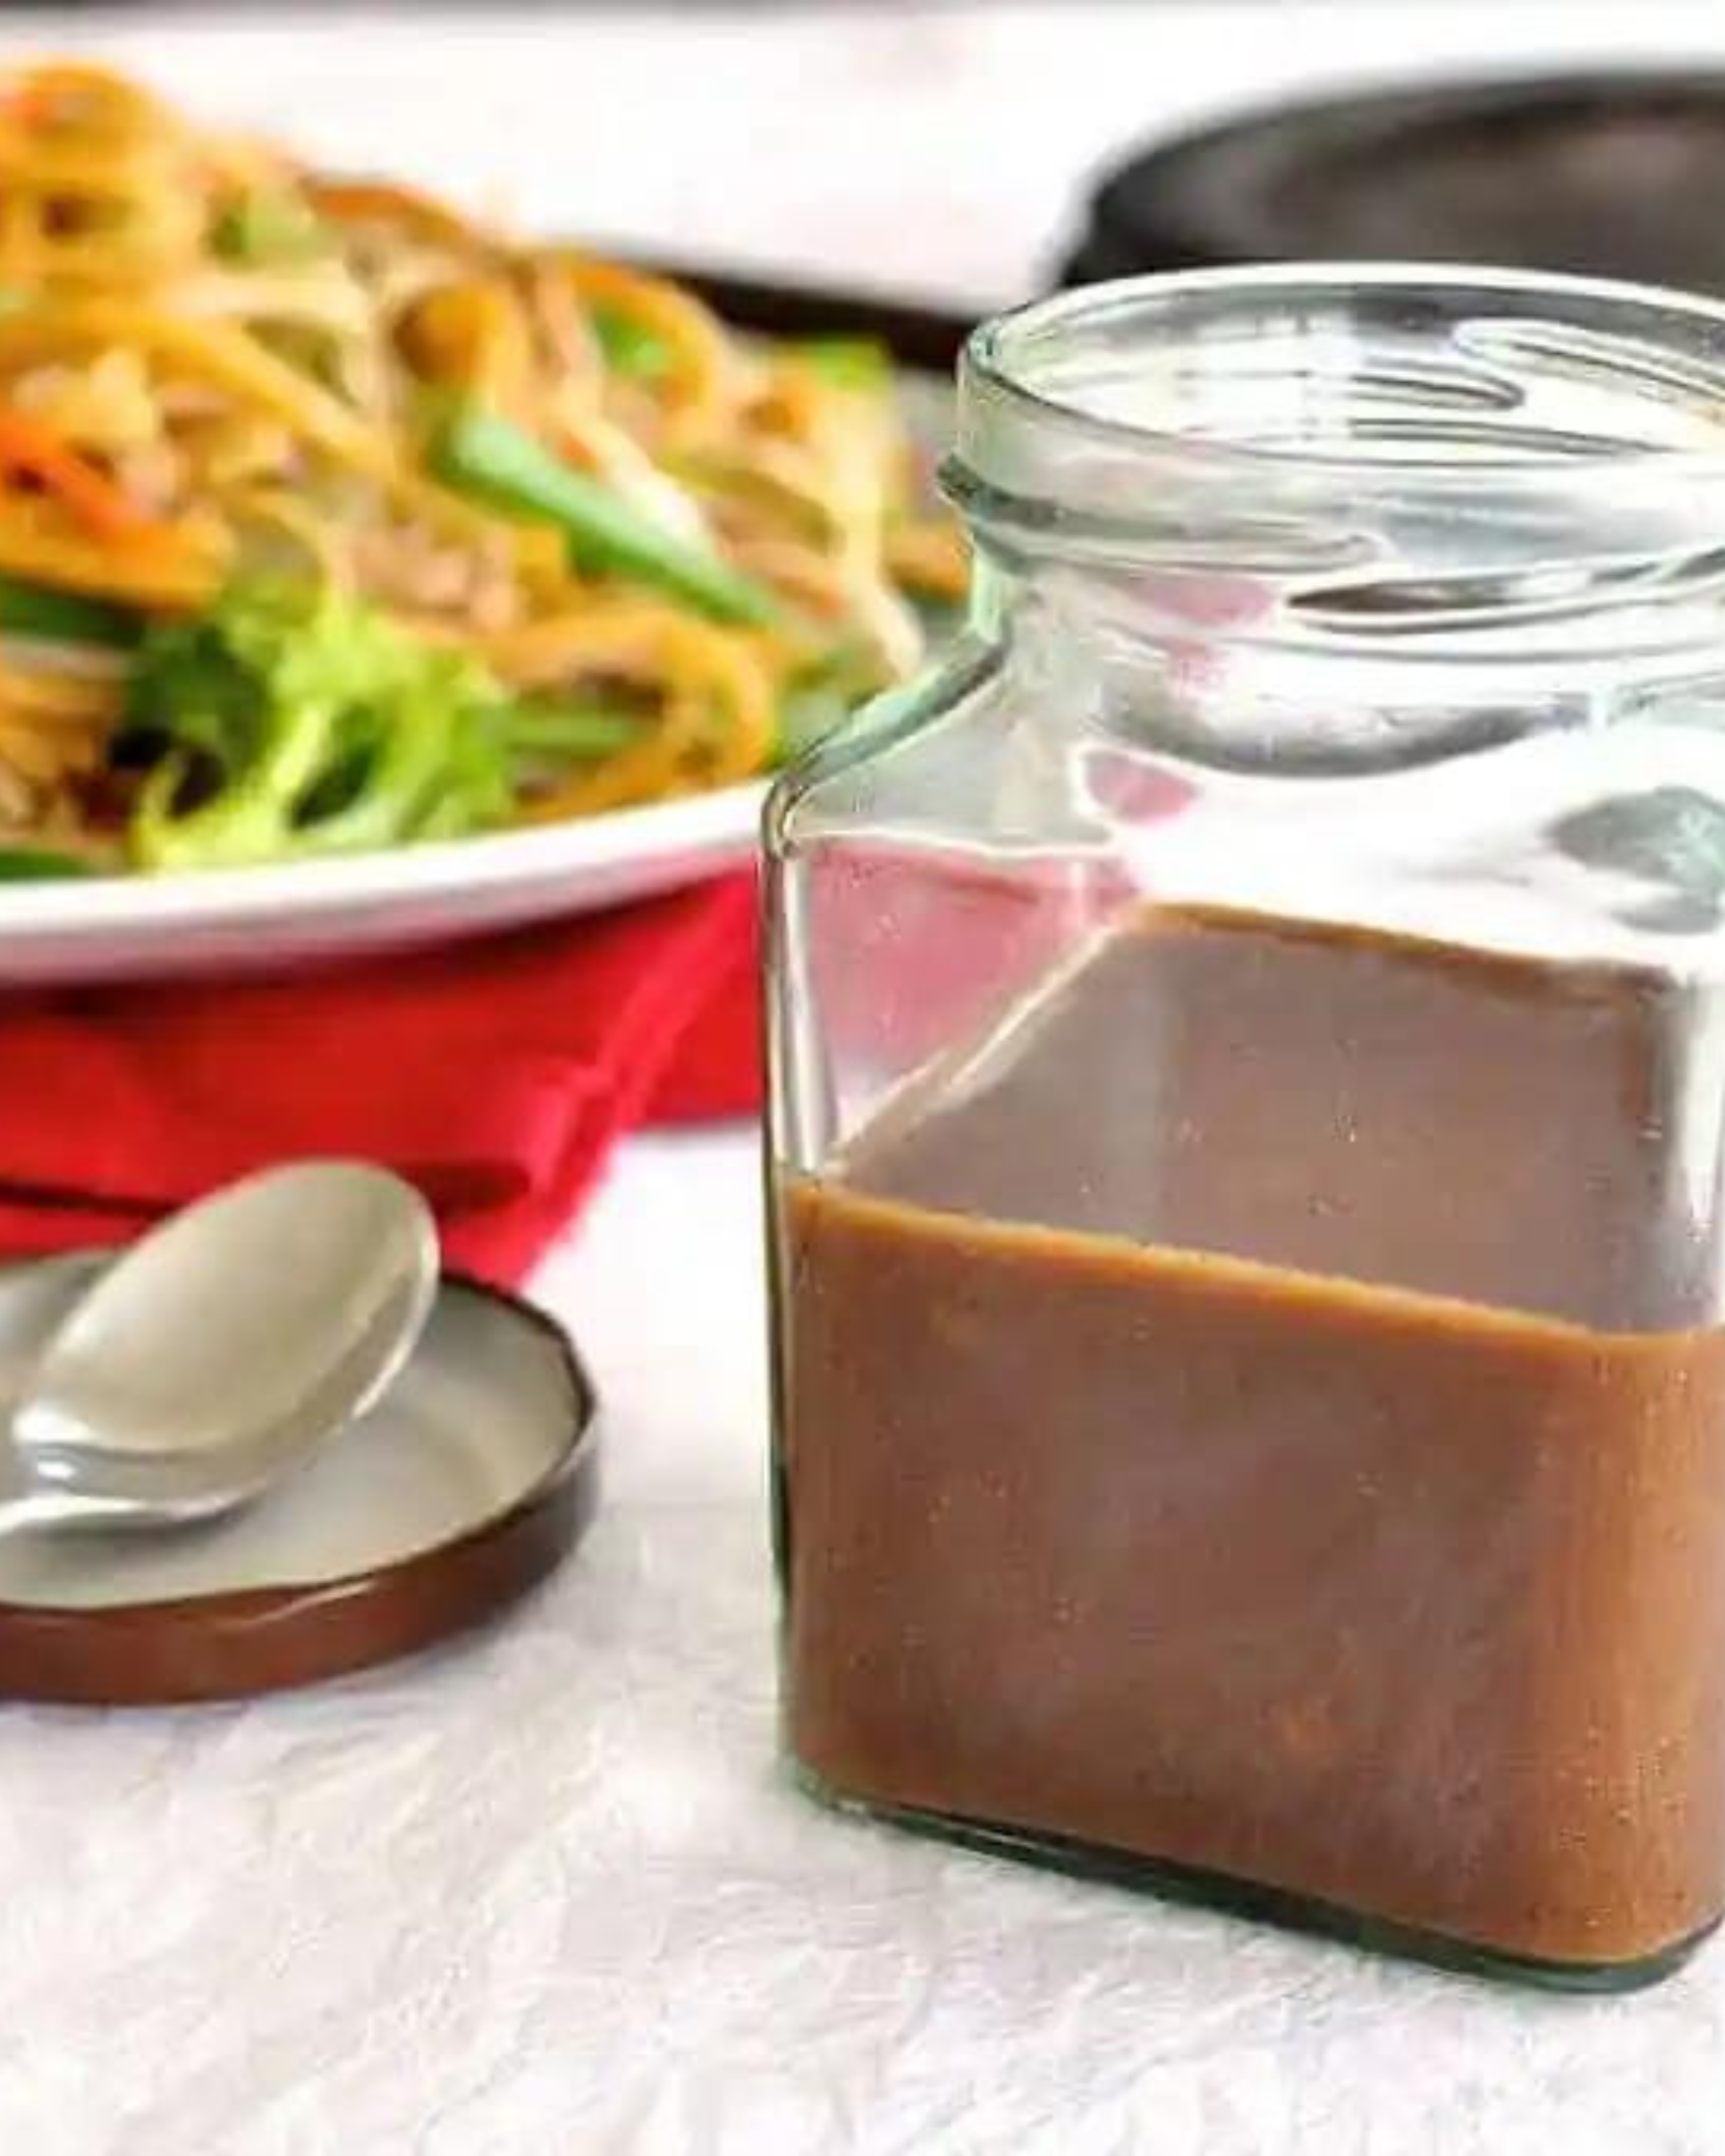 Real Chinese All Purpose Stir Fry Sauce Charlie!